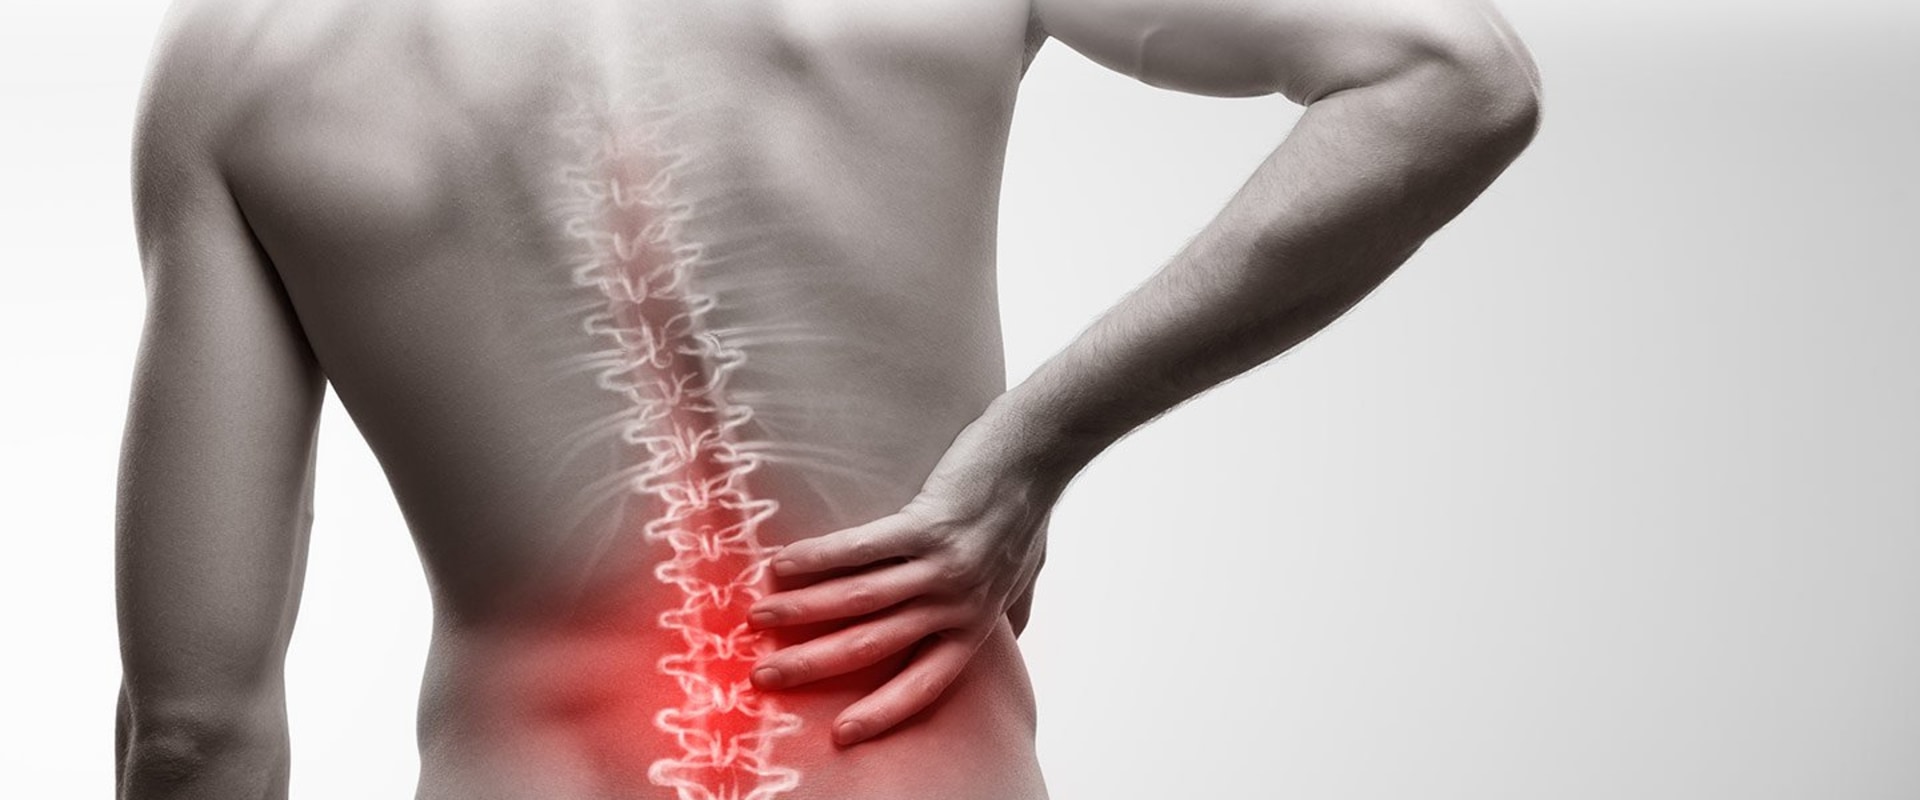 What is the most common injury affecting the back?